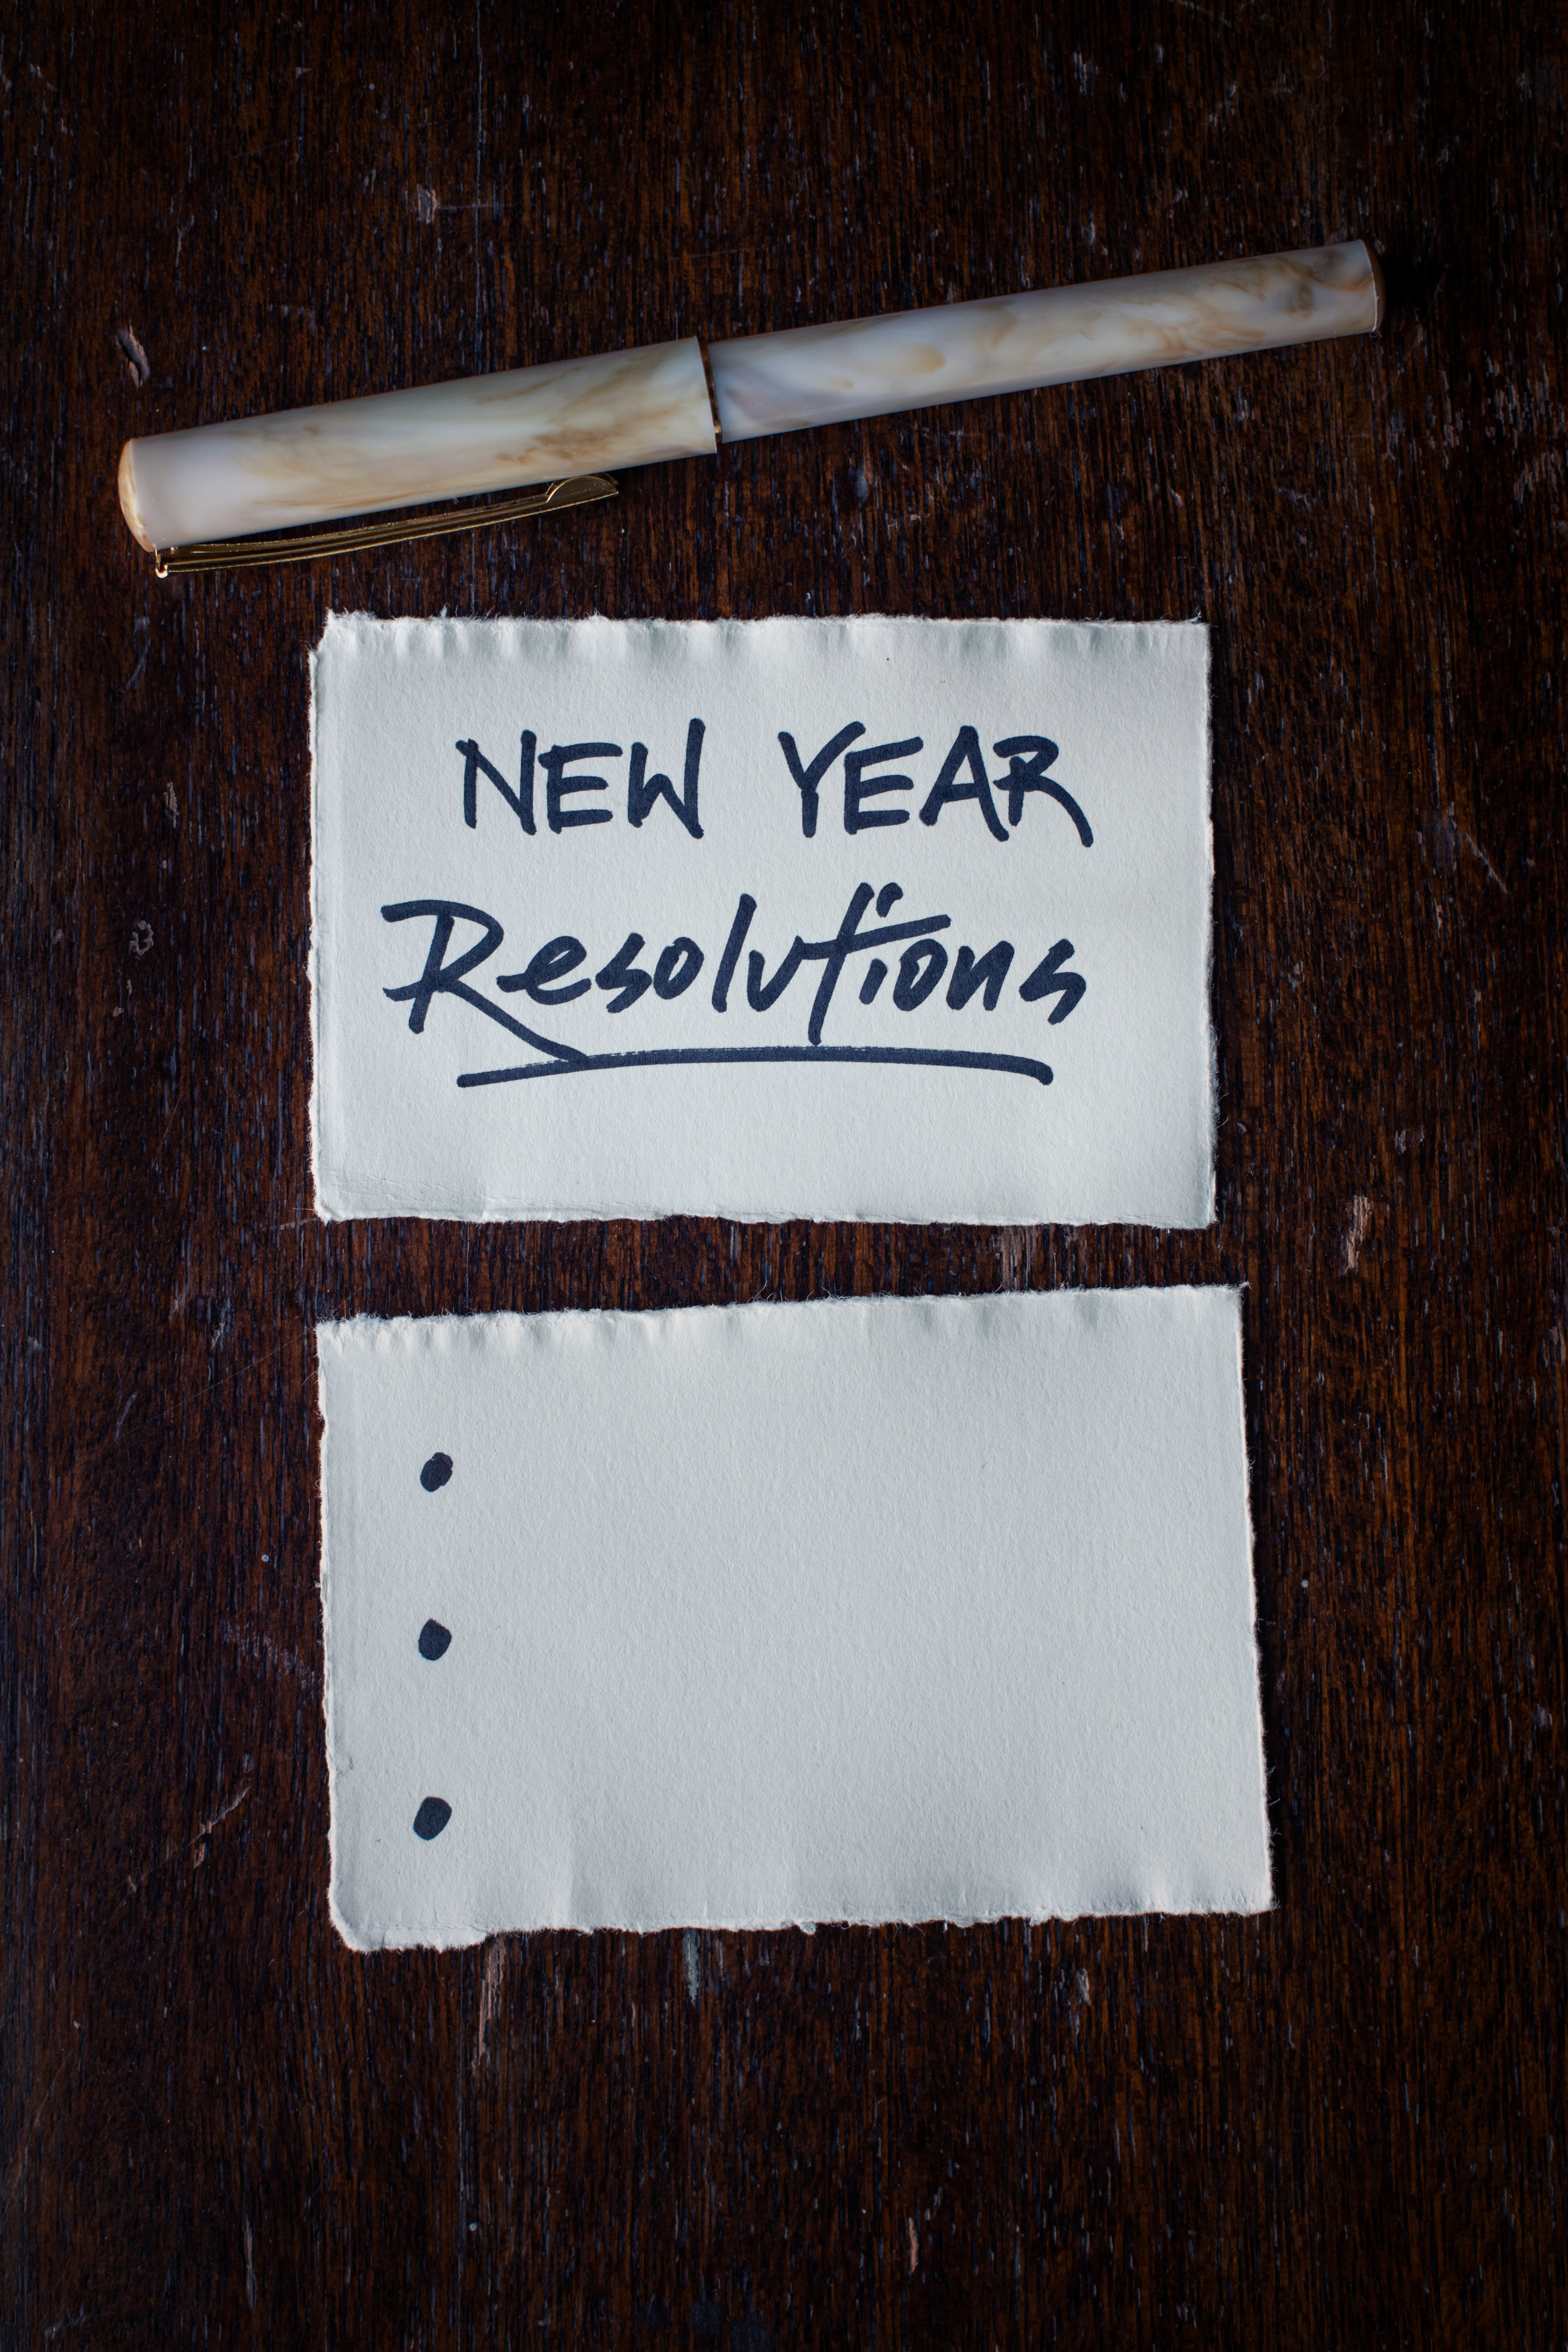 A list of new year resolutions ready to fill in.